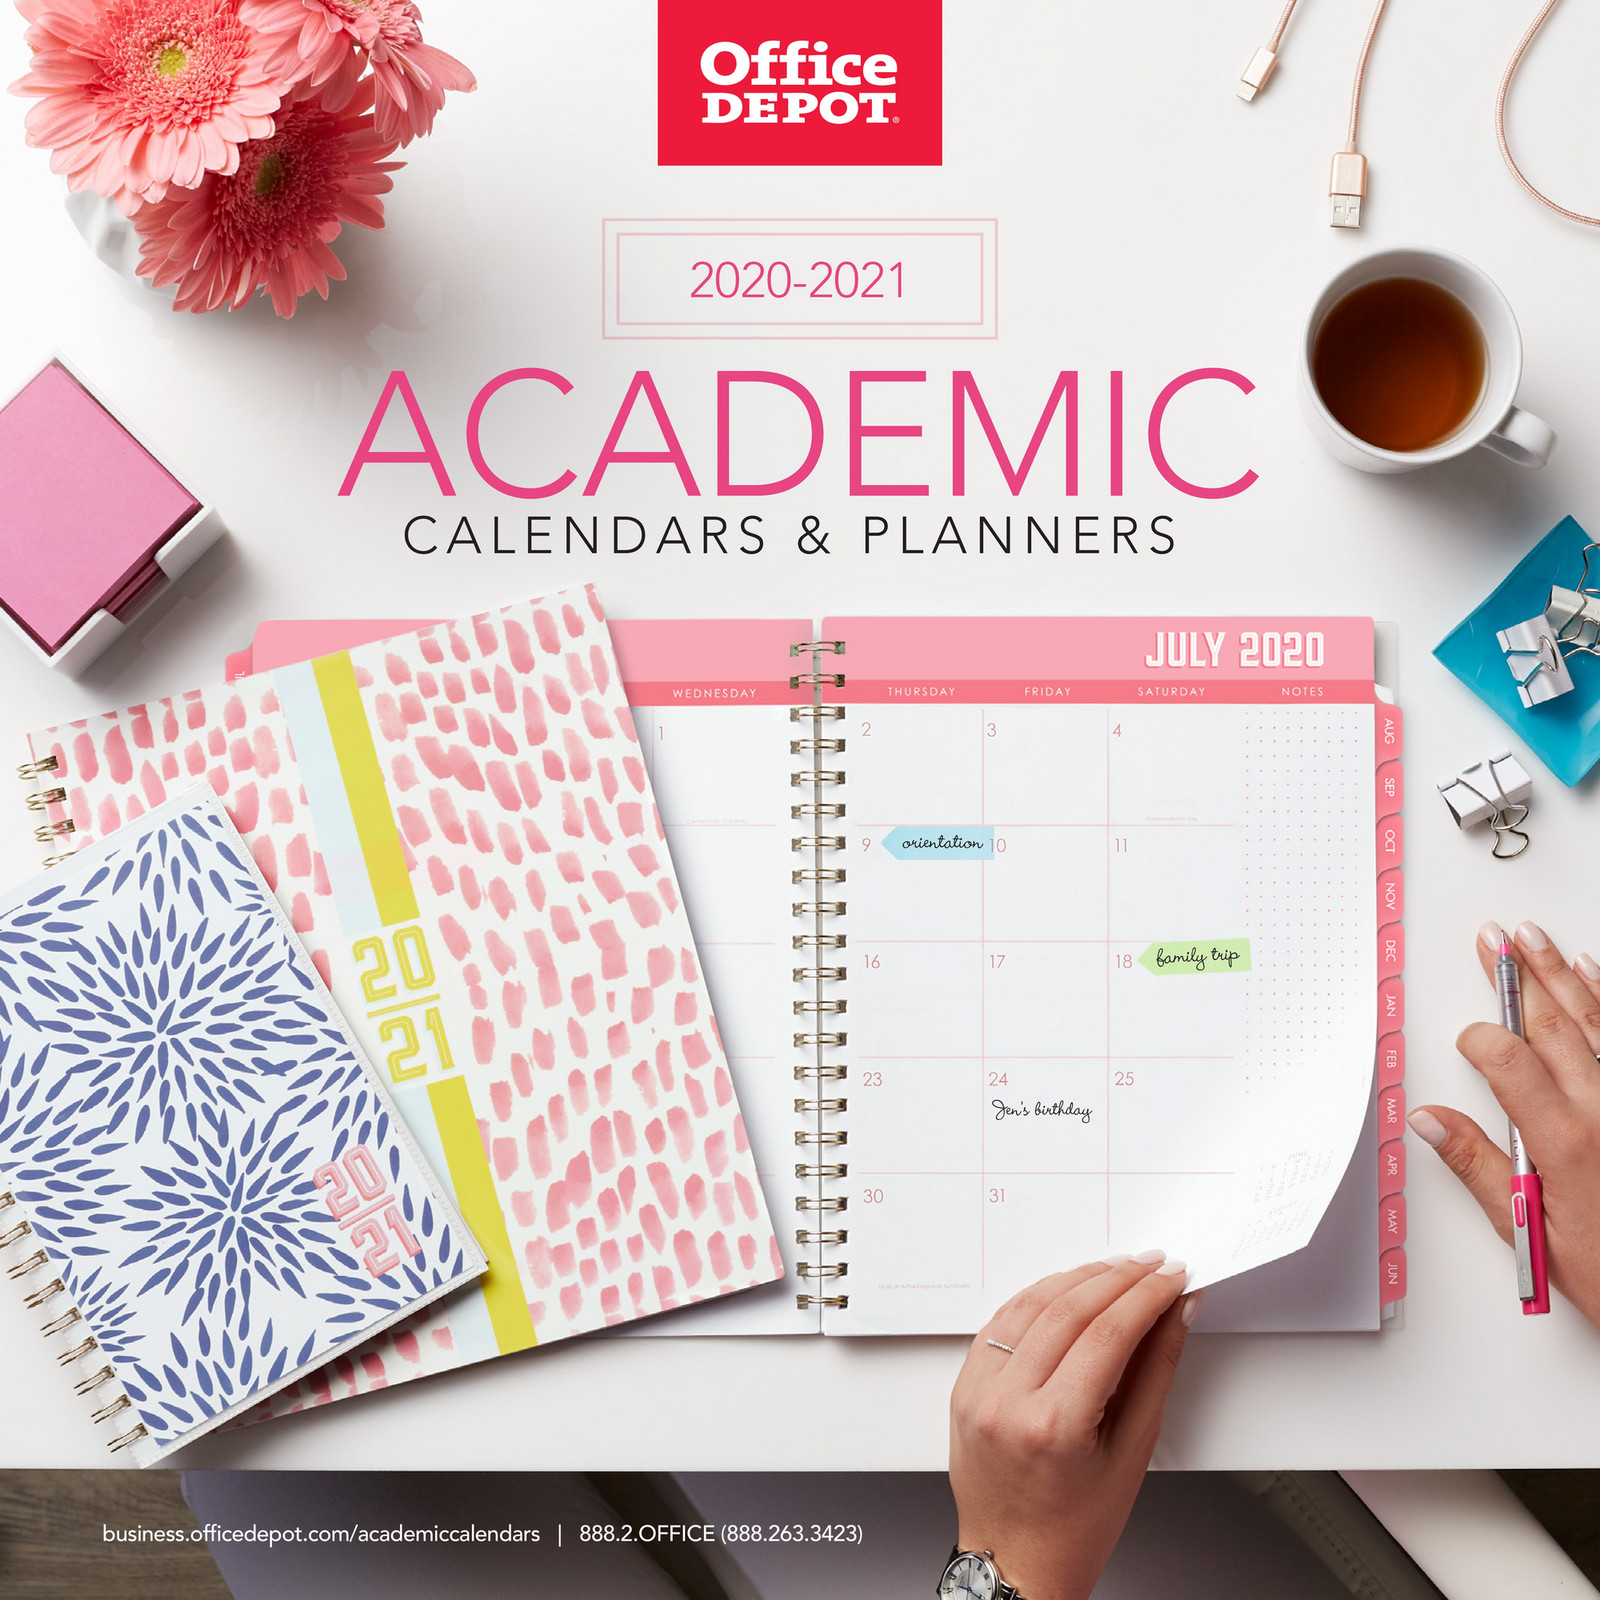 Academic Calendars & Planners 2020 Page 1